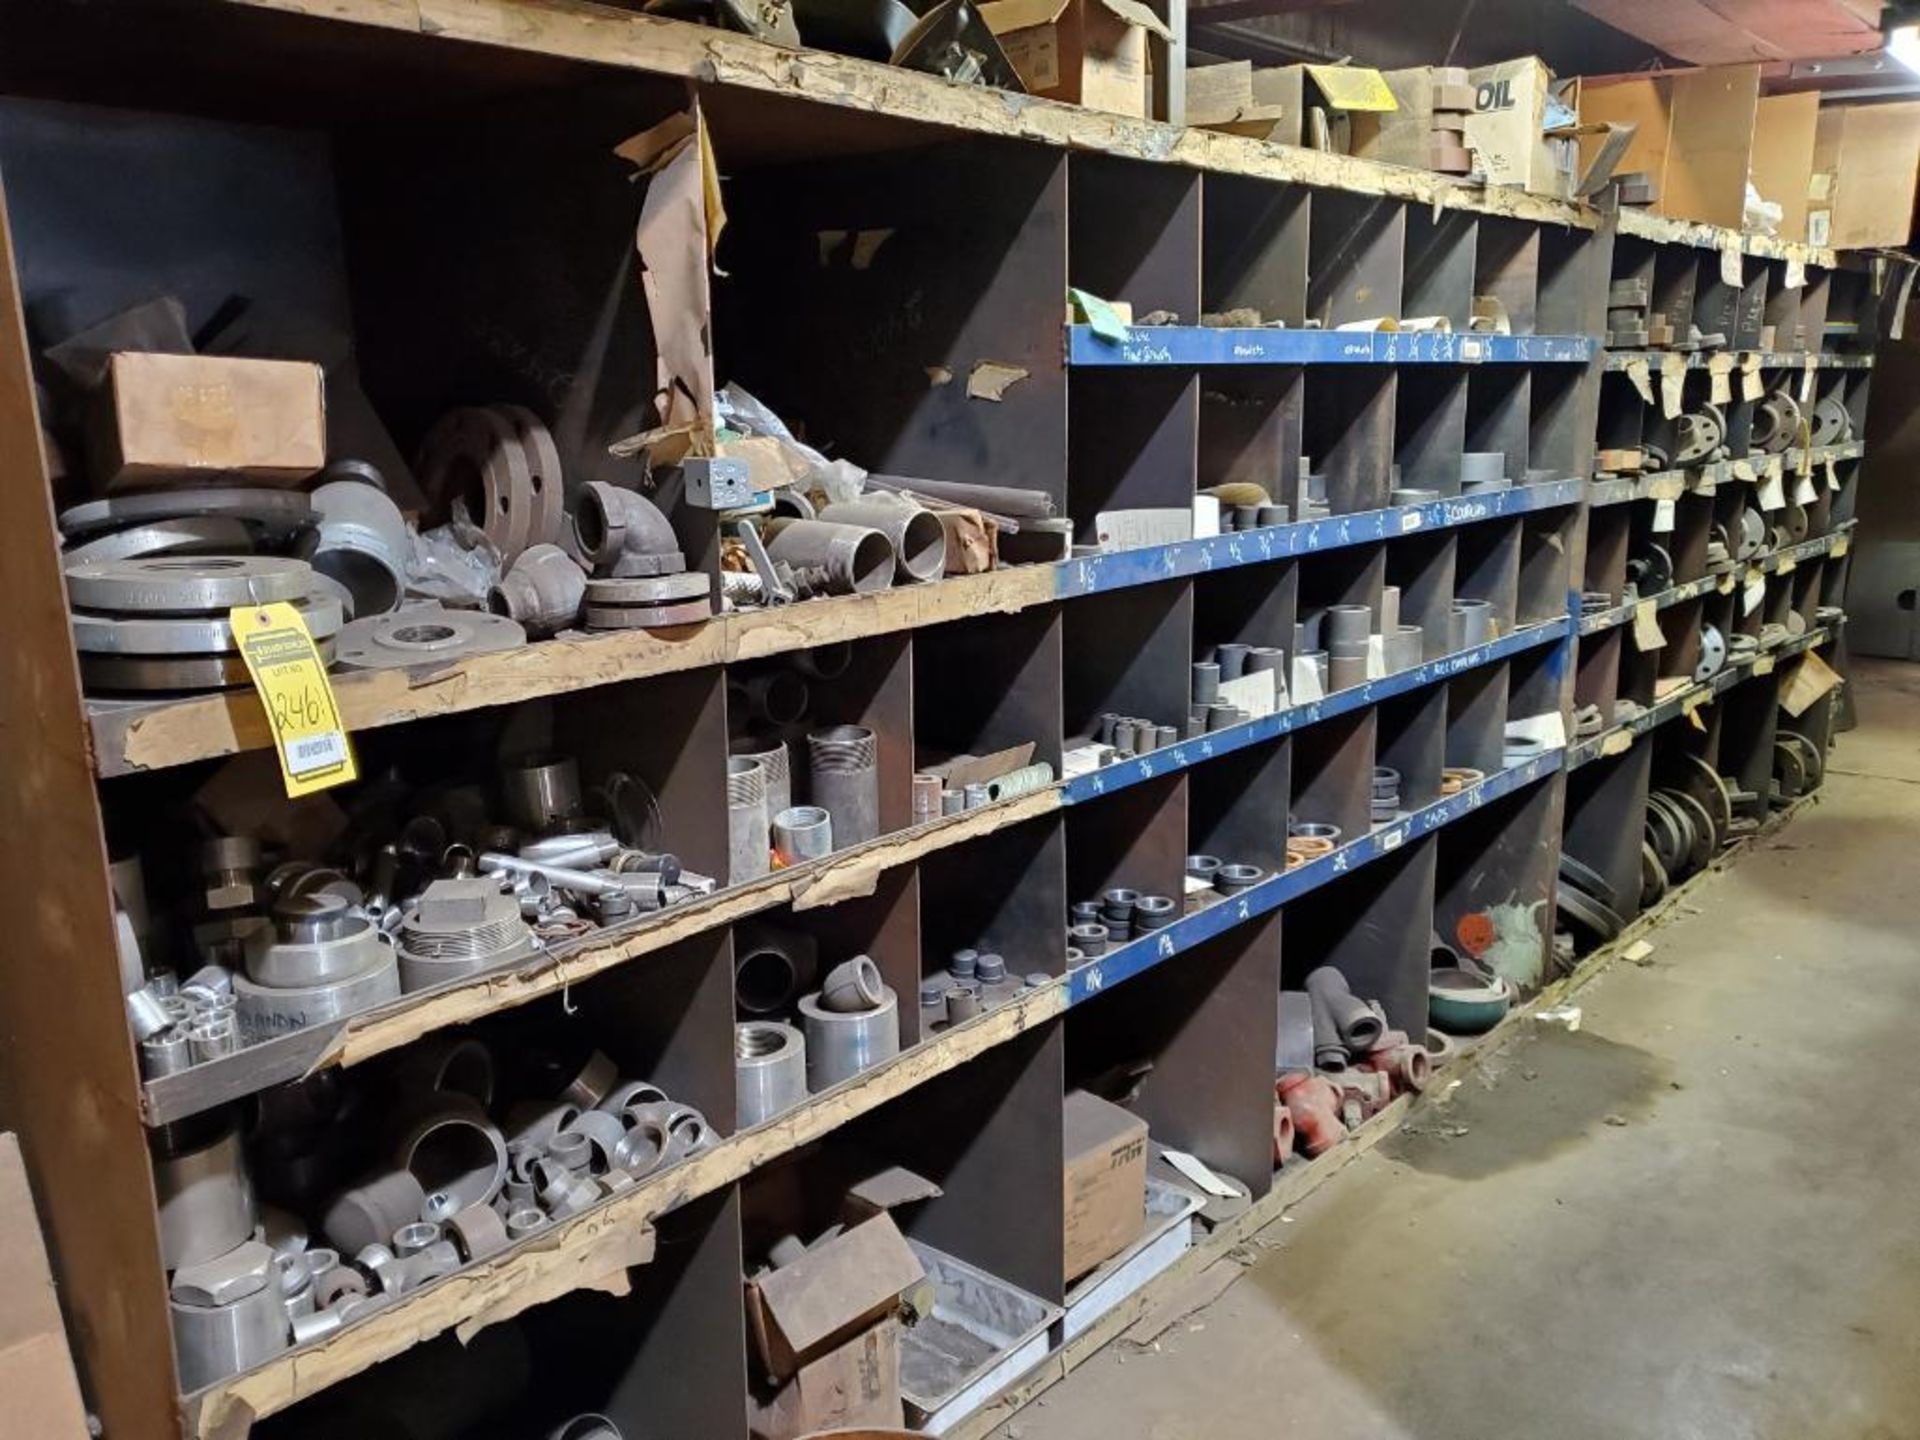 LARGE QUANTITY OF PIPE FITTINGS, FUSES, CHILL RINGS, PLANT SUPPORT AND SHELVING UNITS